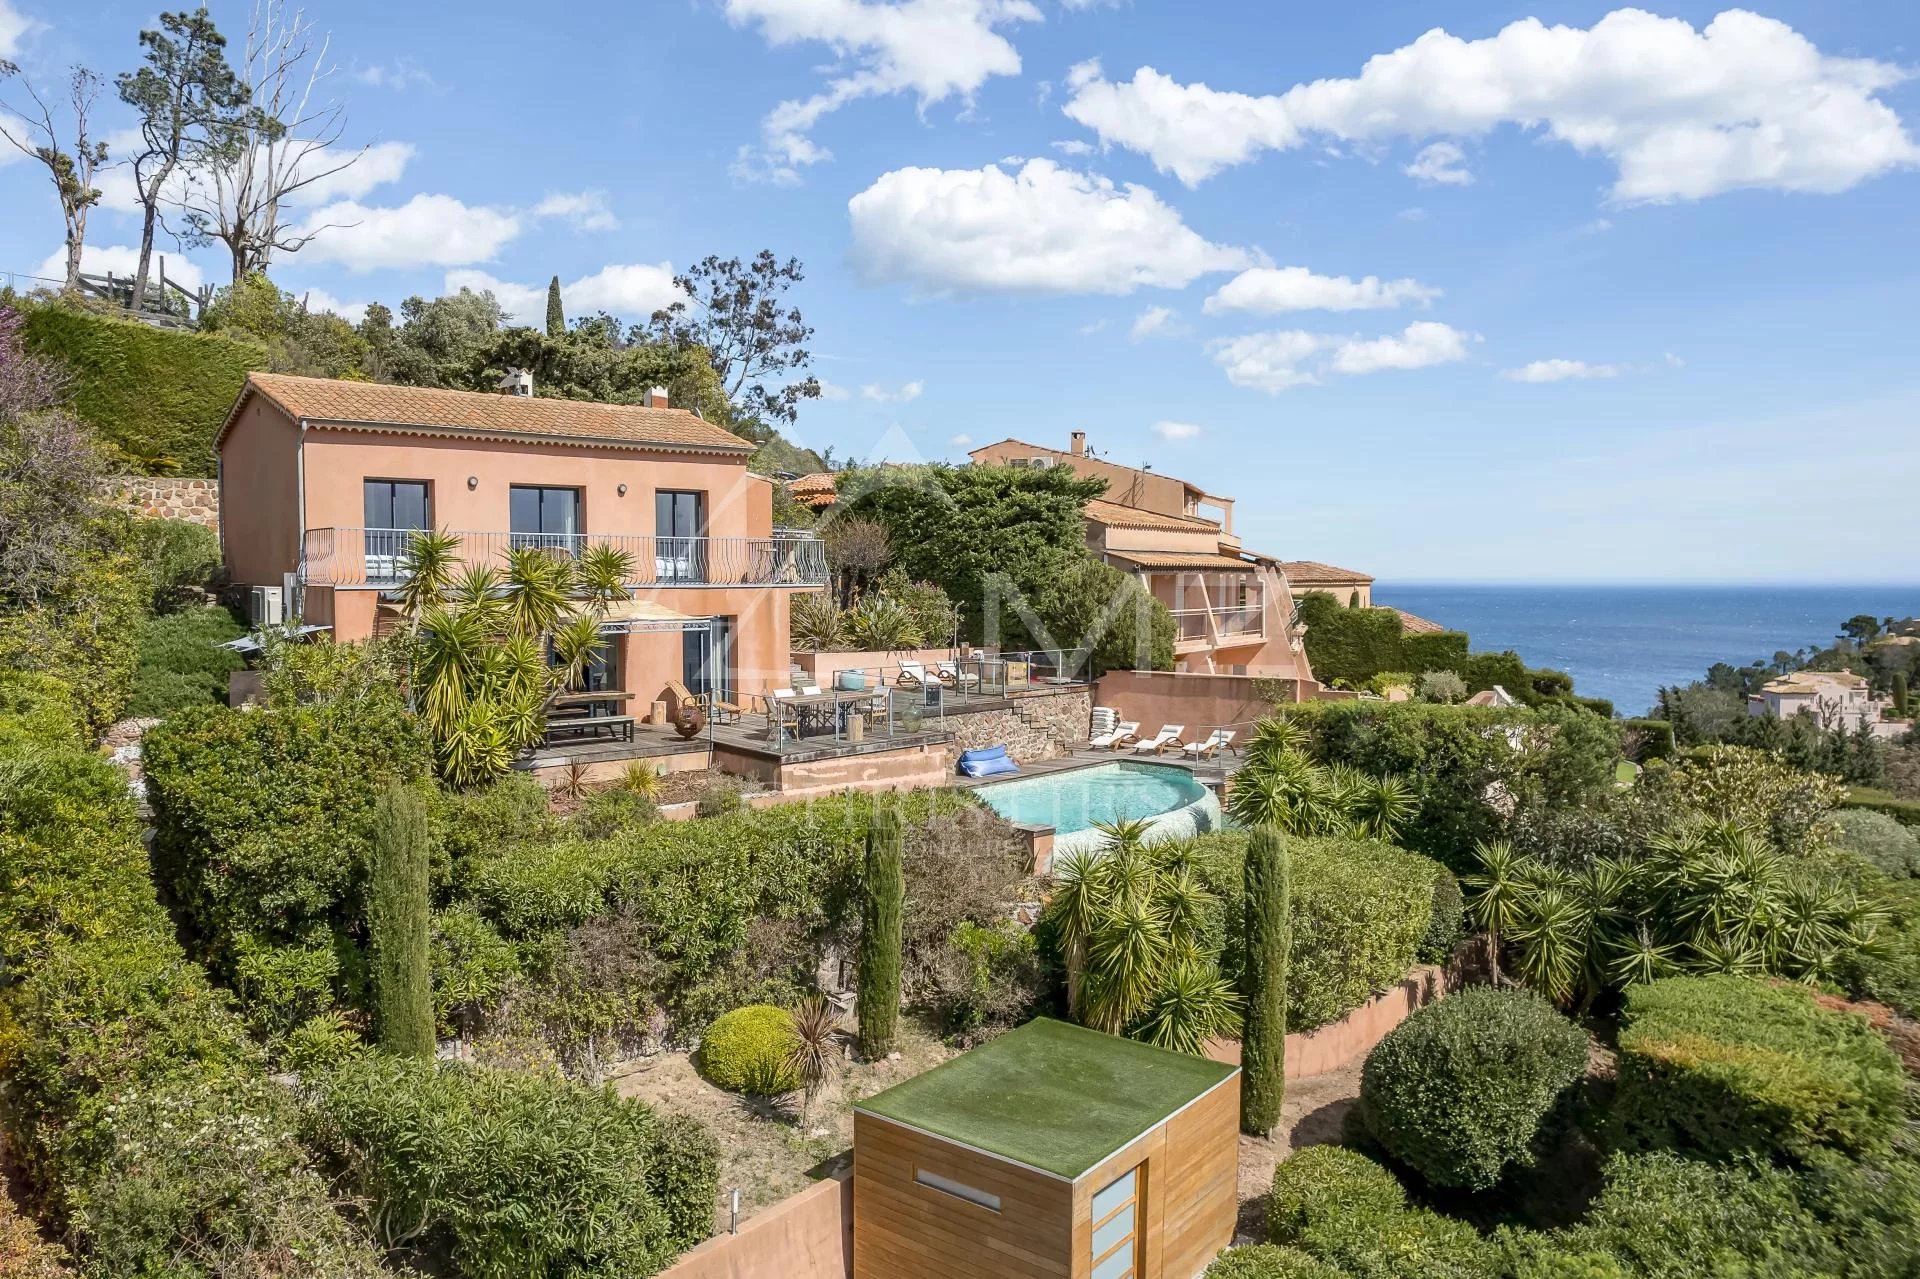 Close to Cannes - Villa with sea view